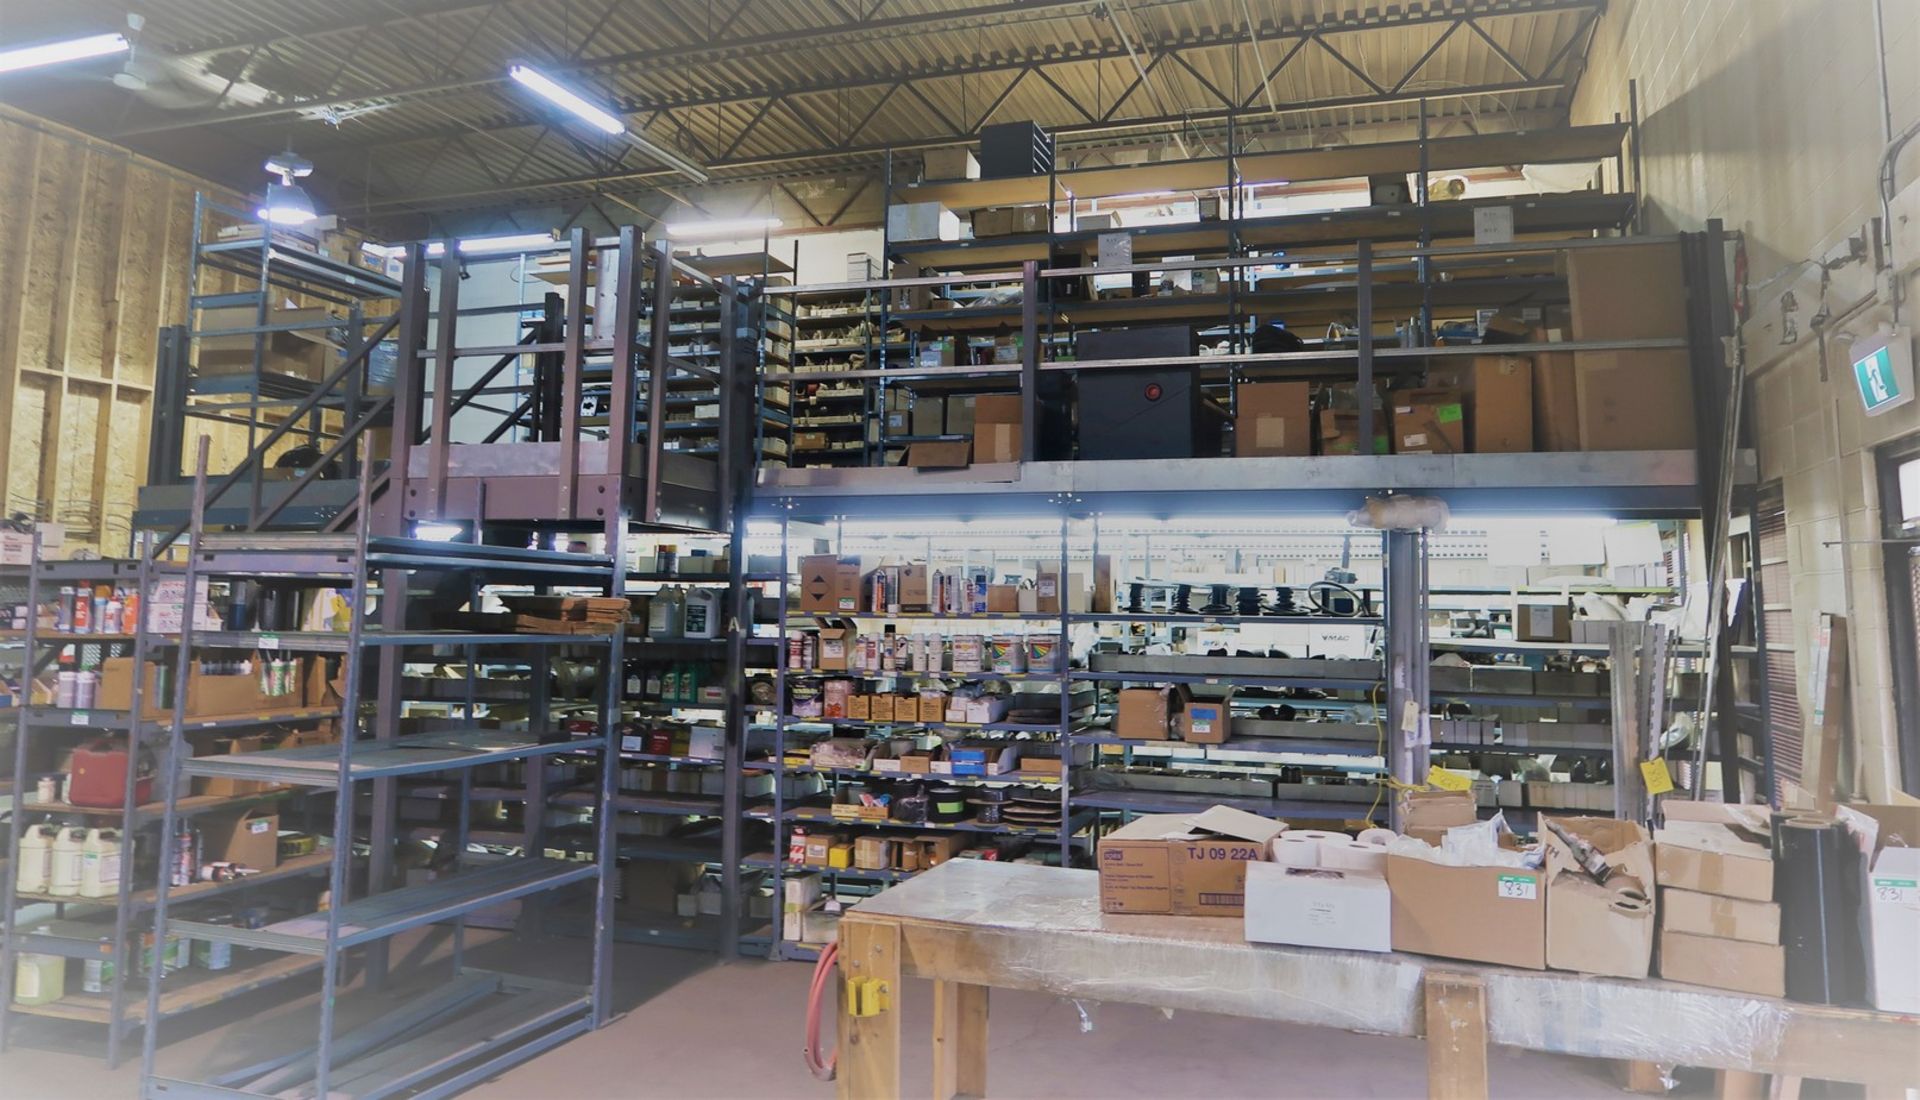 FREE STANDING MEZZANINE SYSTEM W/STAIRS, 4-6 SECTION EZIRACK PARTS SHELVING - Image 3 of 4